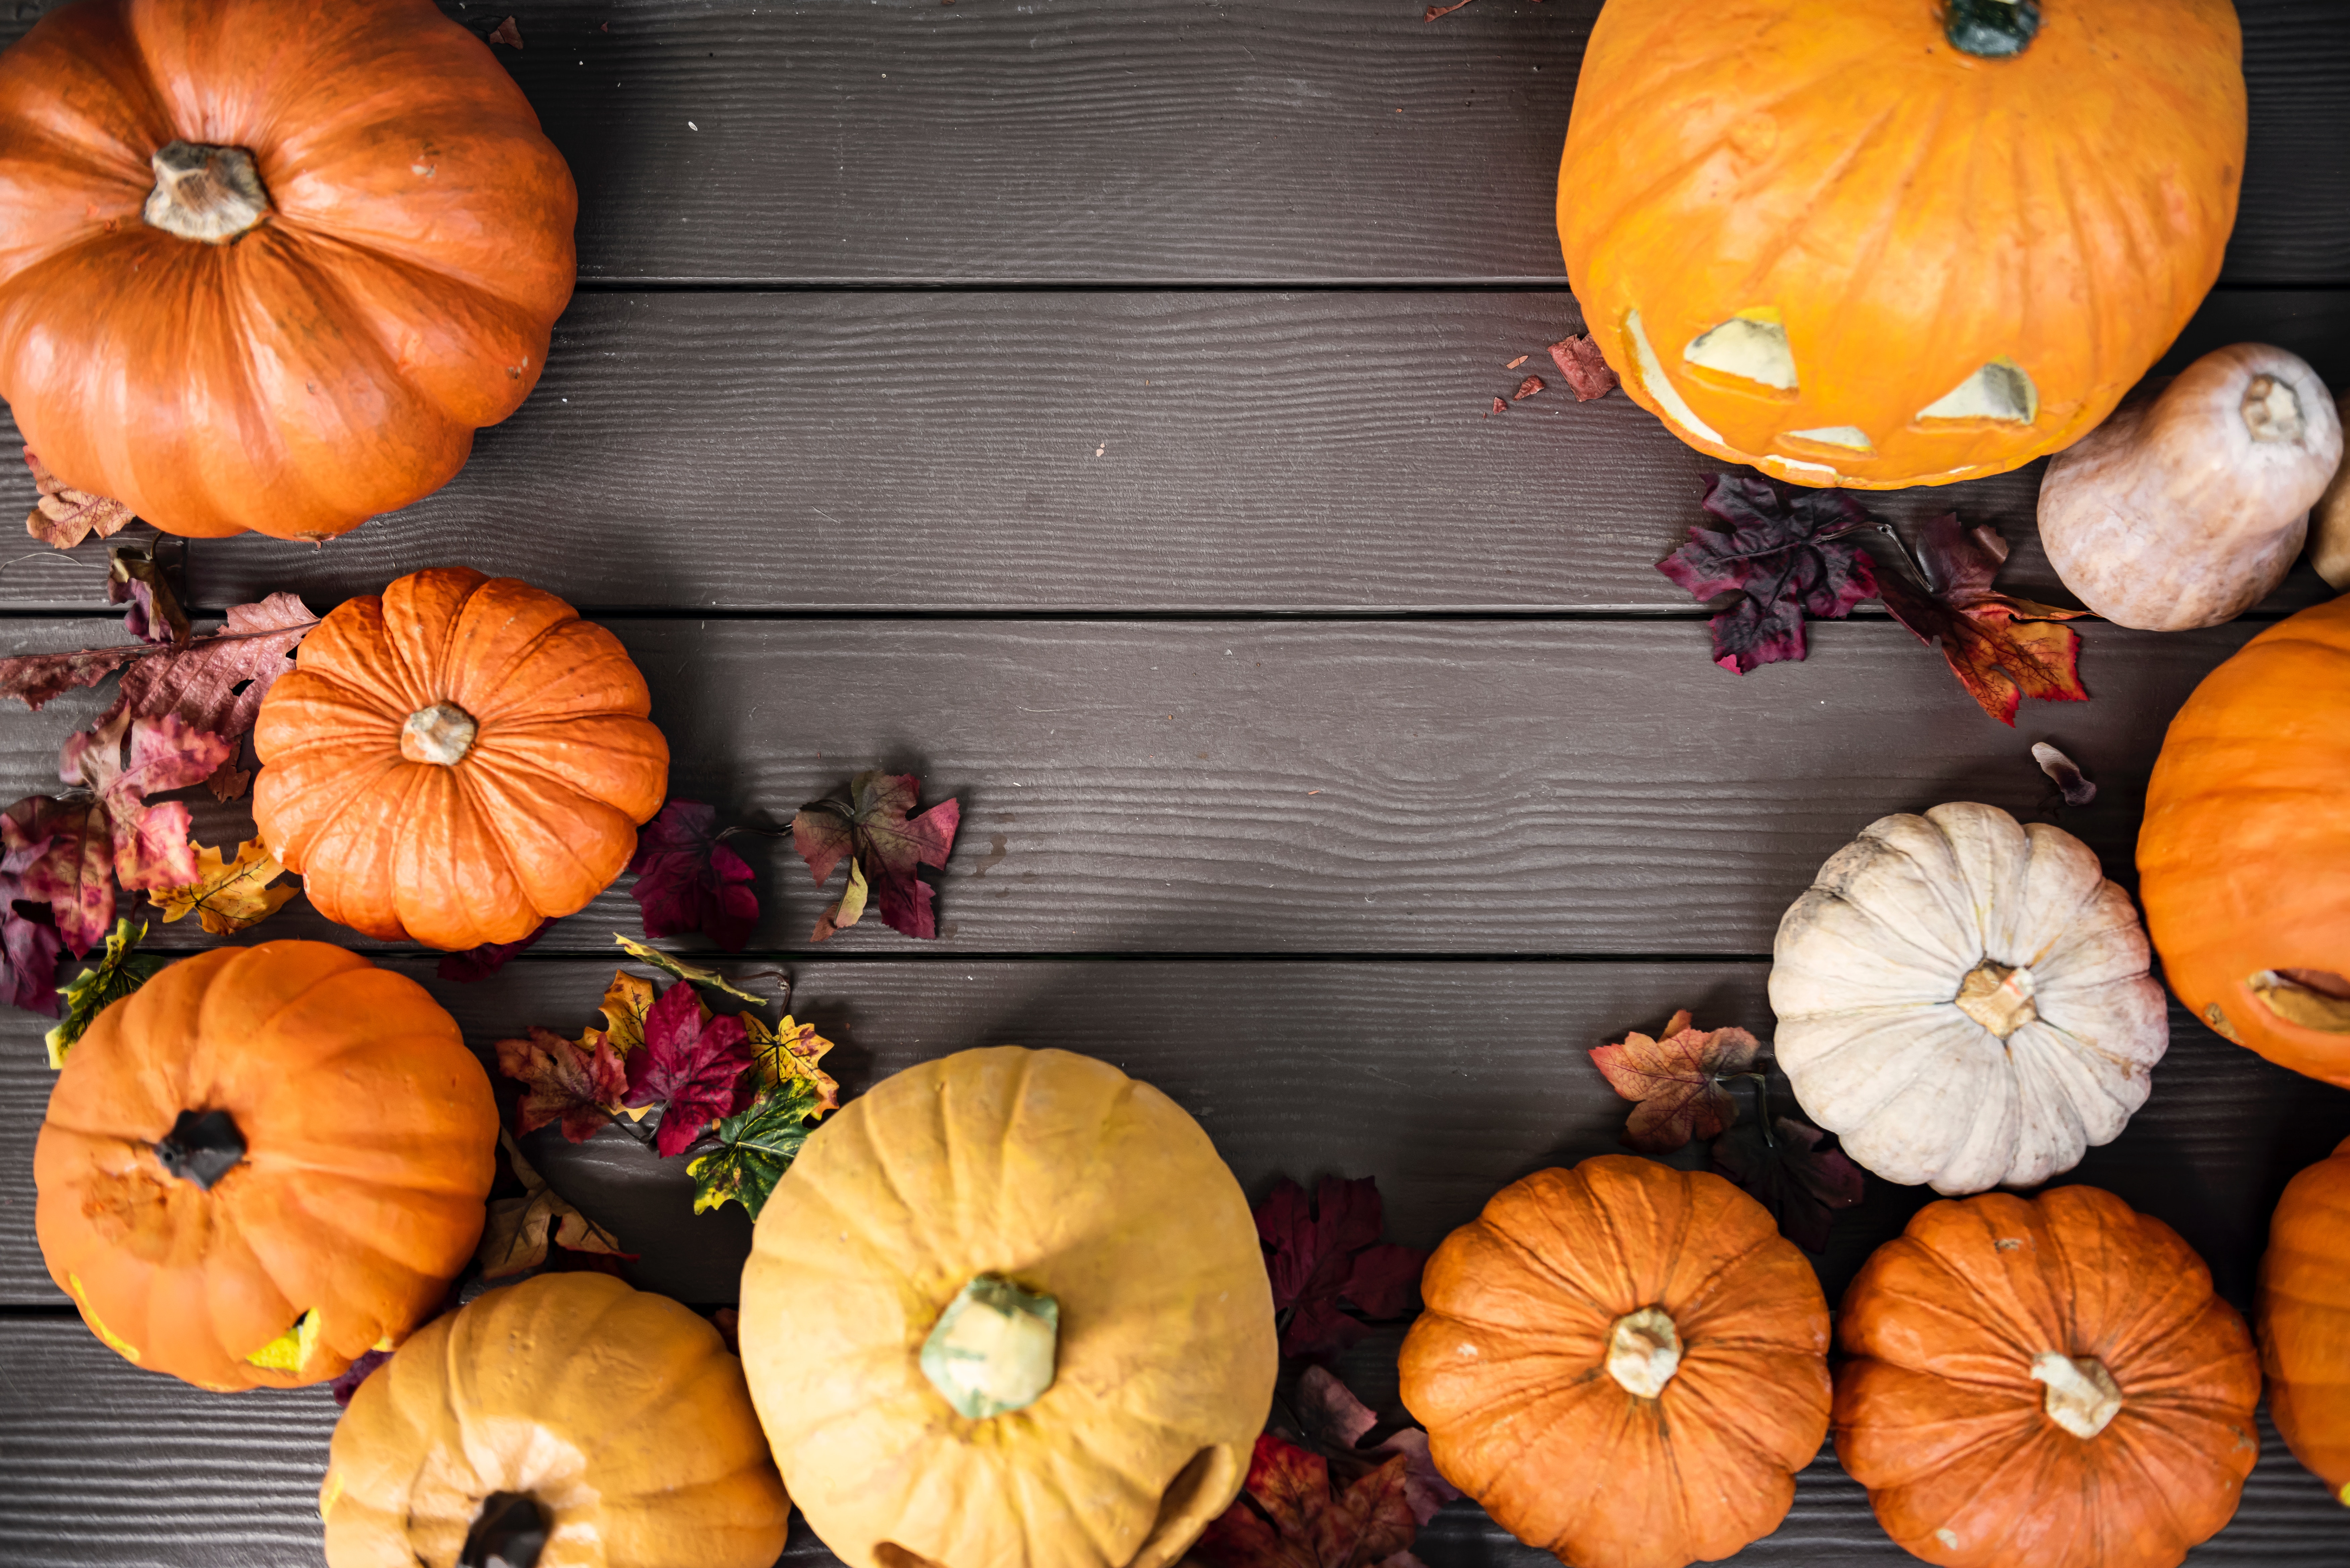 5 Places to Celebrate Halloween